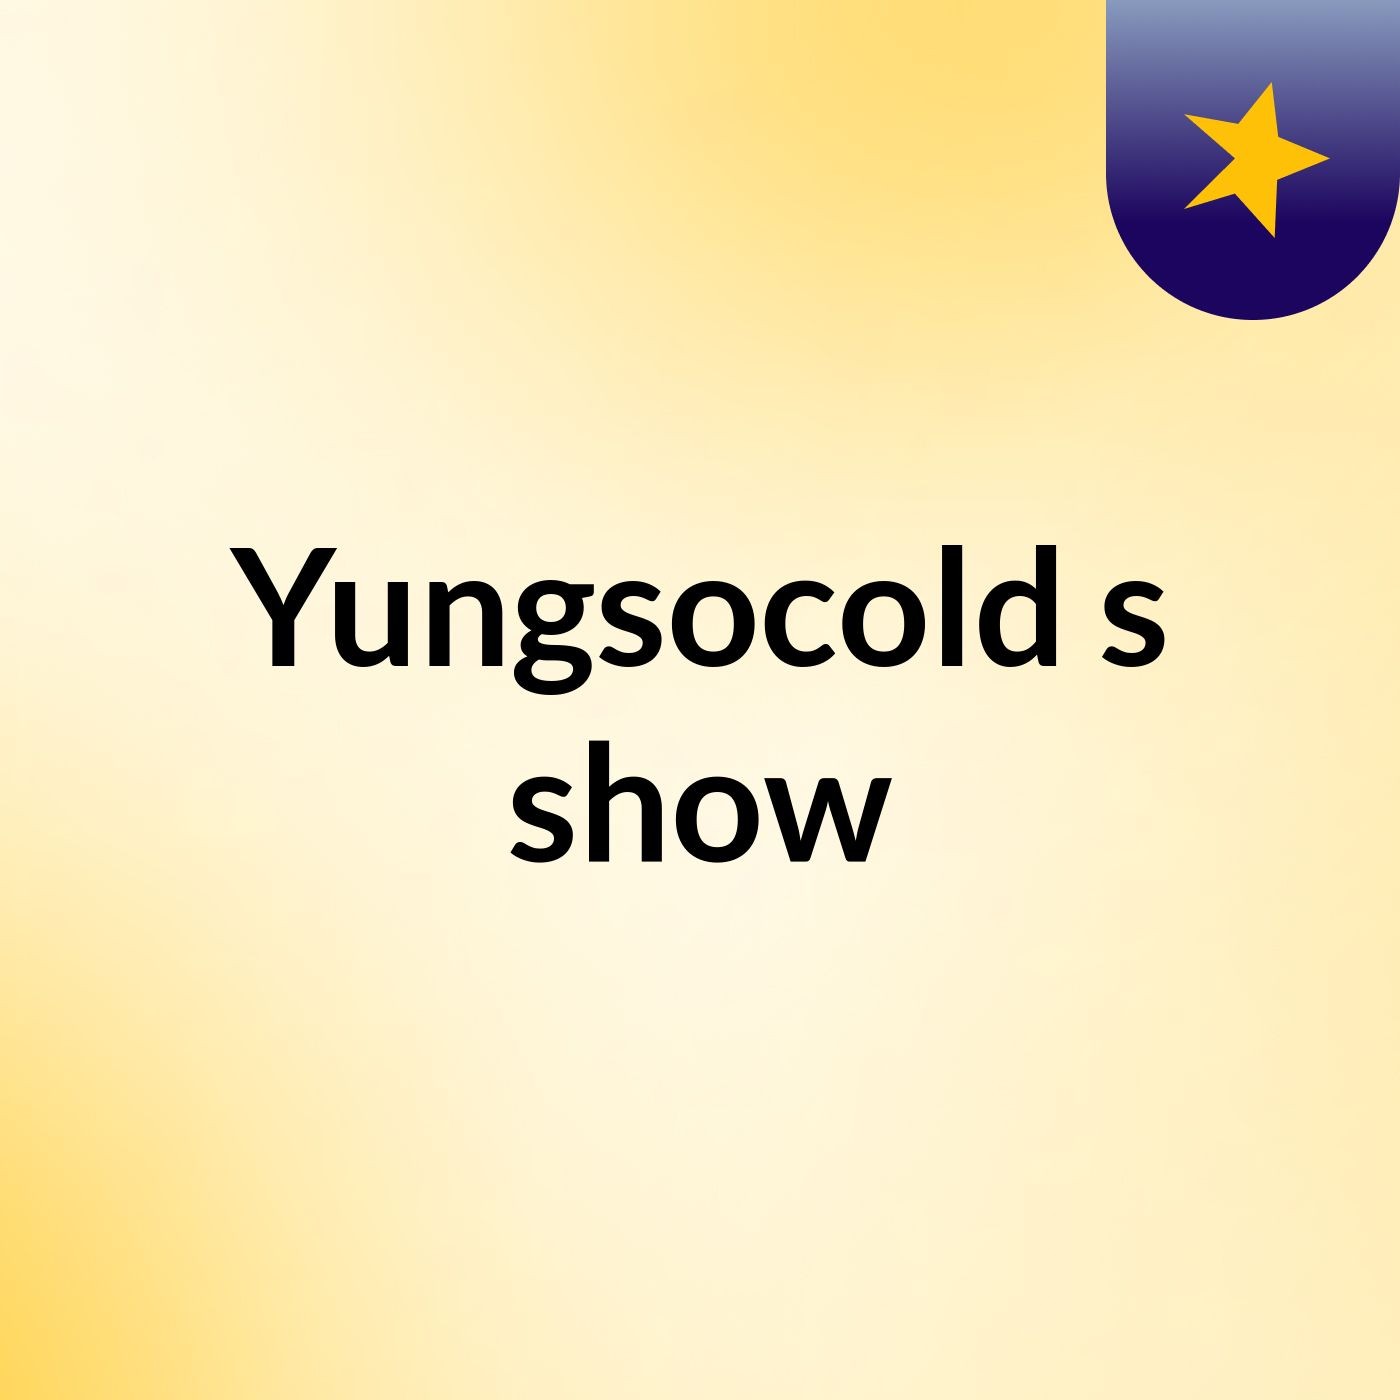 Yungsocold's show